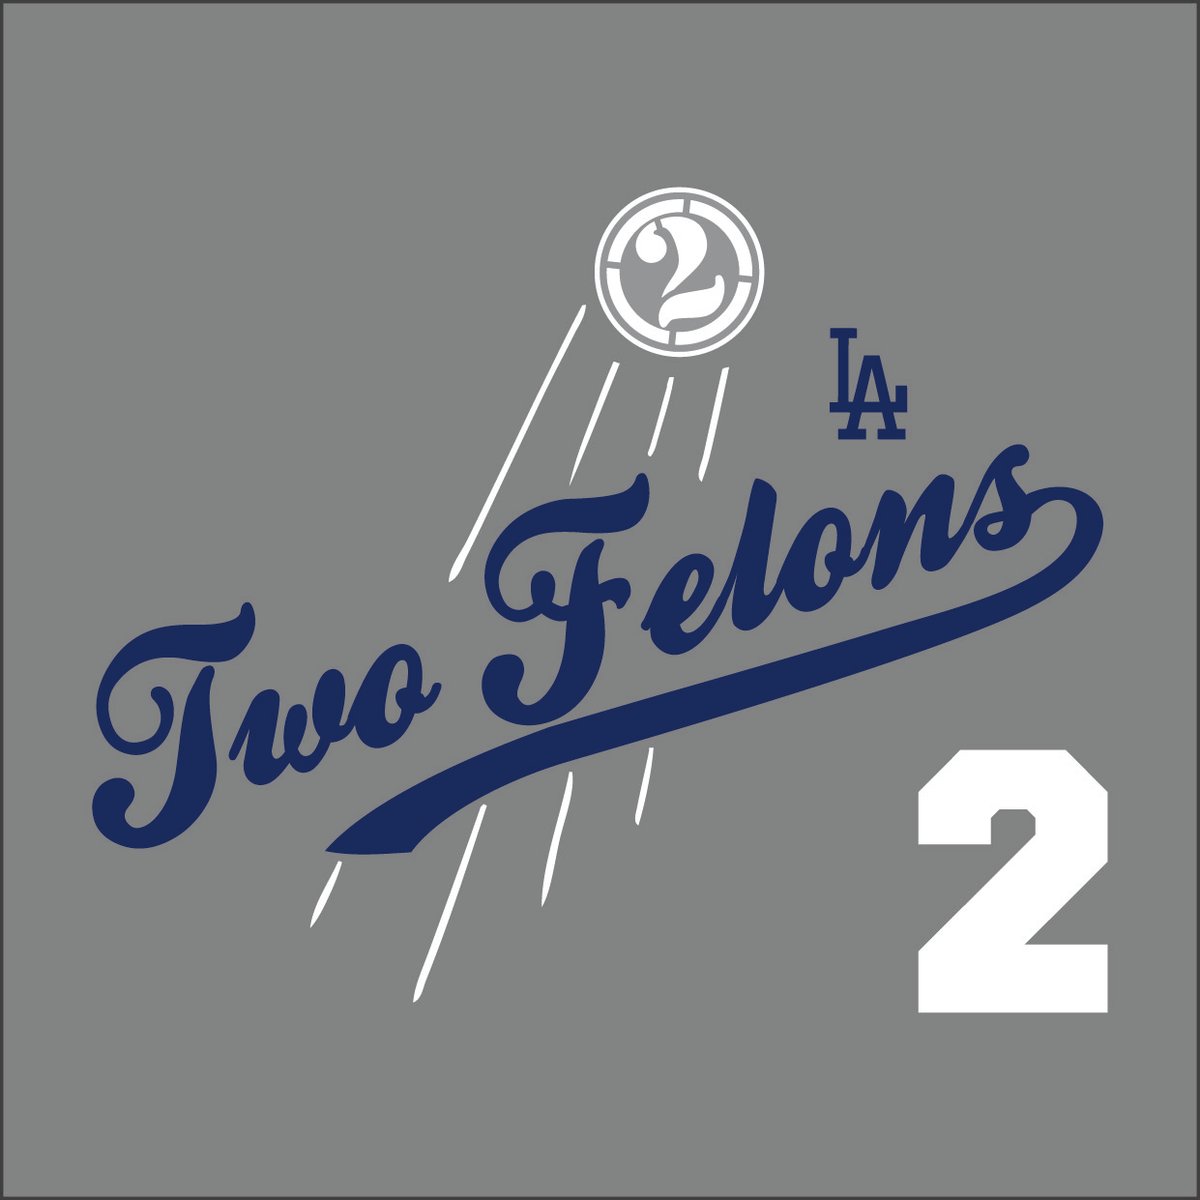 Two Felons "Play Ball" (gry/nvy/wht)